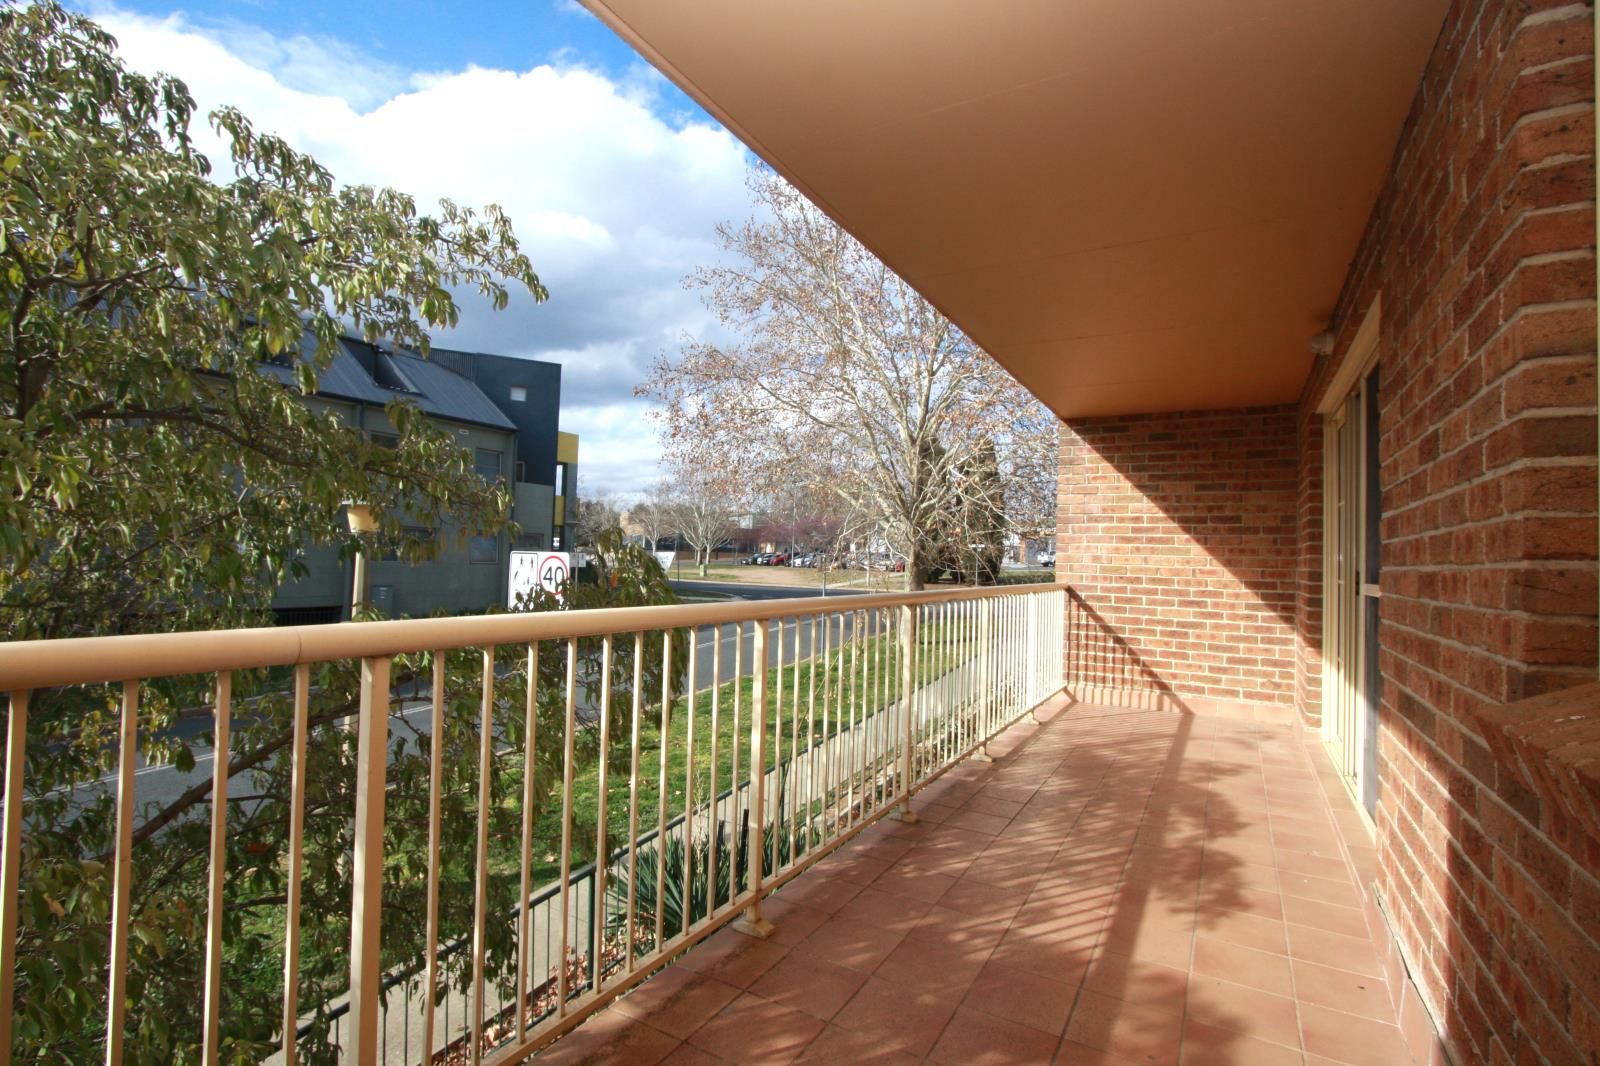 2 bedrooms House in 33/1 Waddell Place CURTIN ACT, 2605